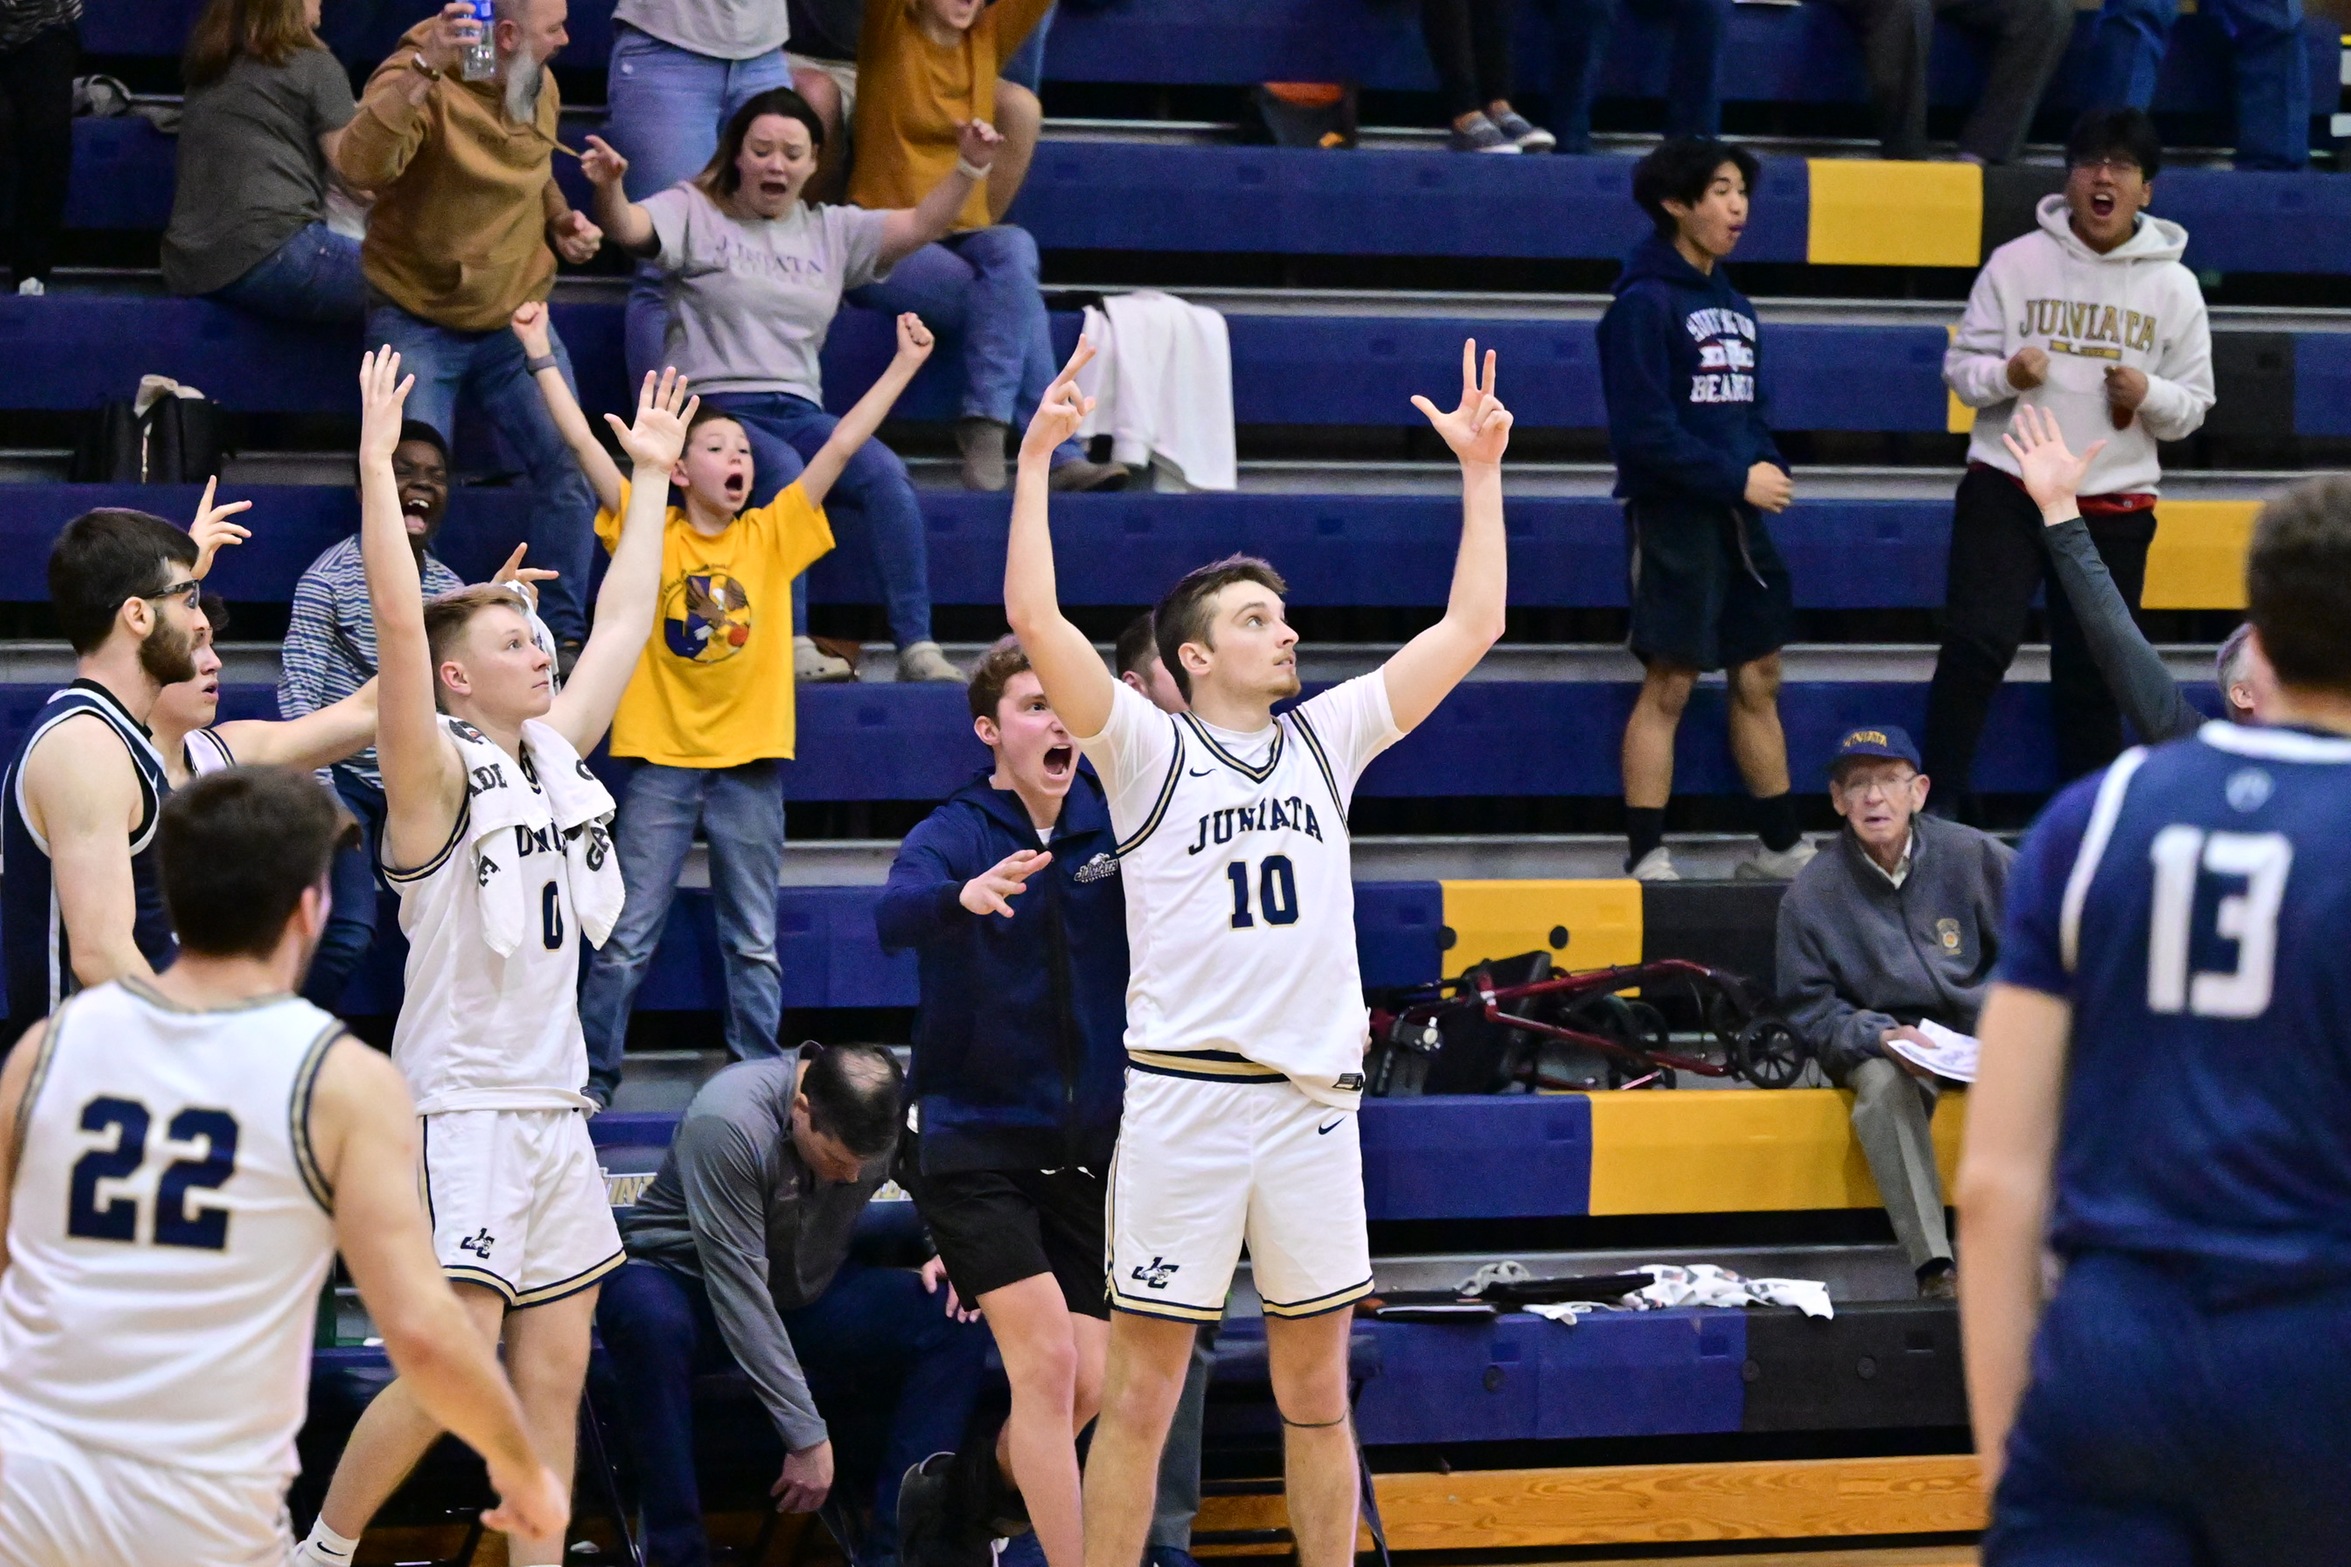 The Miracle at Memorial - Men's Basketball Advances to ECAC Championship in 2OT Thriller Over PSU Behrend